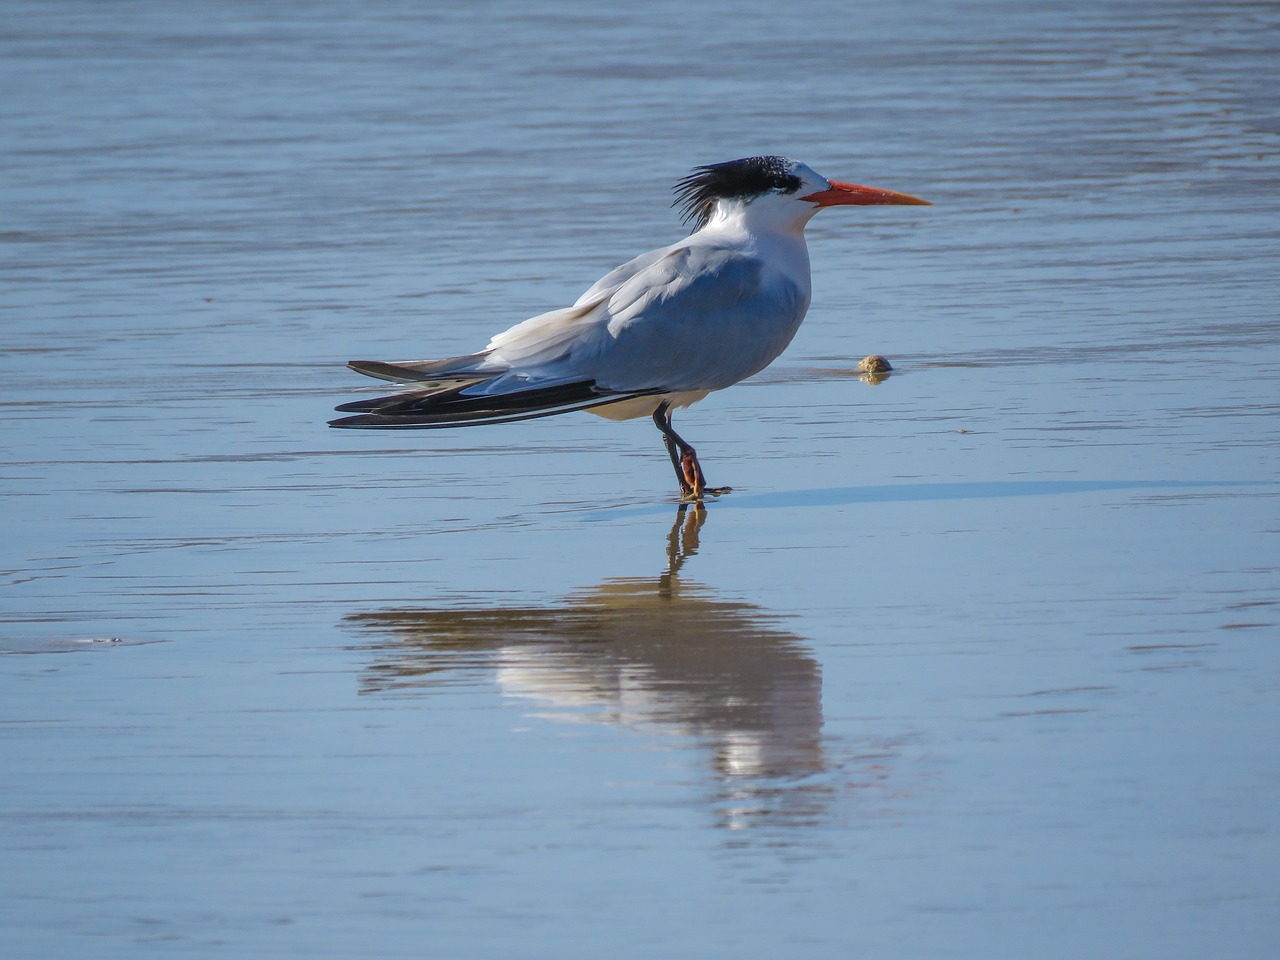 a bird that is standing in the water, arabesque, white male, at the beach, white and orange, glossy reflections